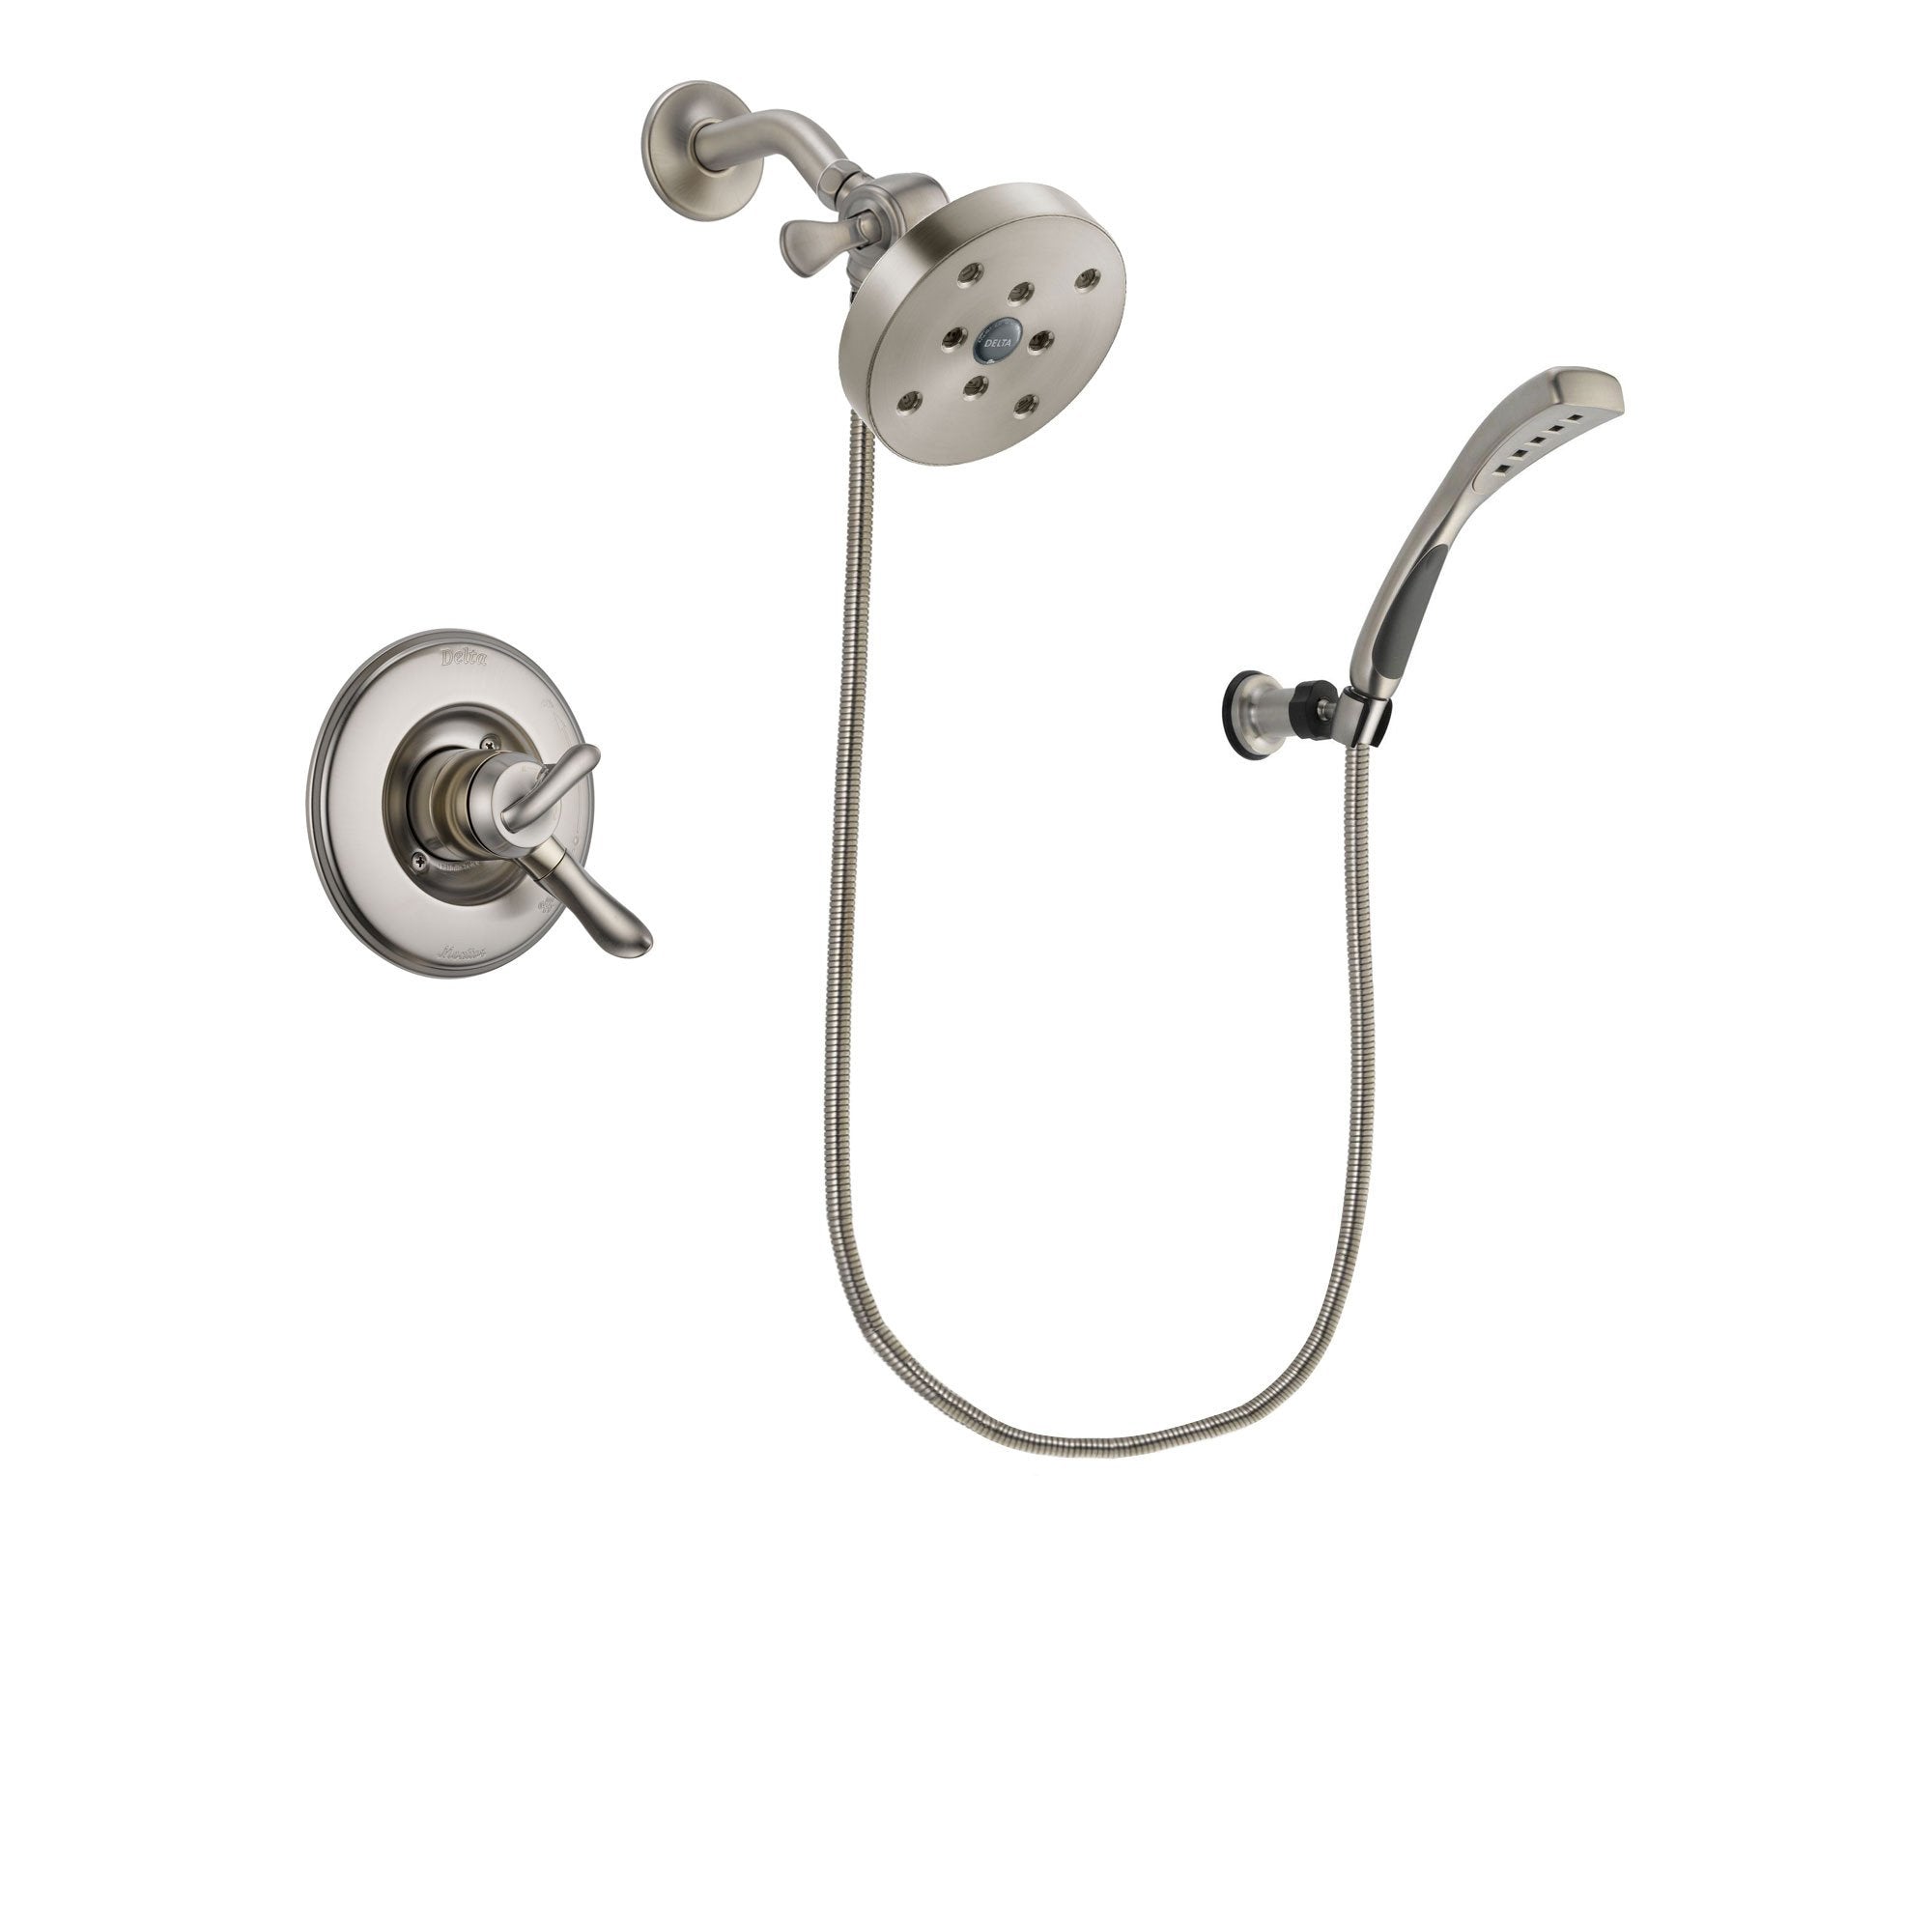 Delta Linden Stainless Steel Finish Dual Control Shower Faucet System Package with 5-1/2 inch Shower Head and Wall Mounted Handshower Includes Rough-in Valve DSP1918V